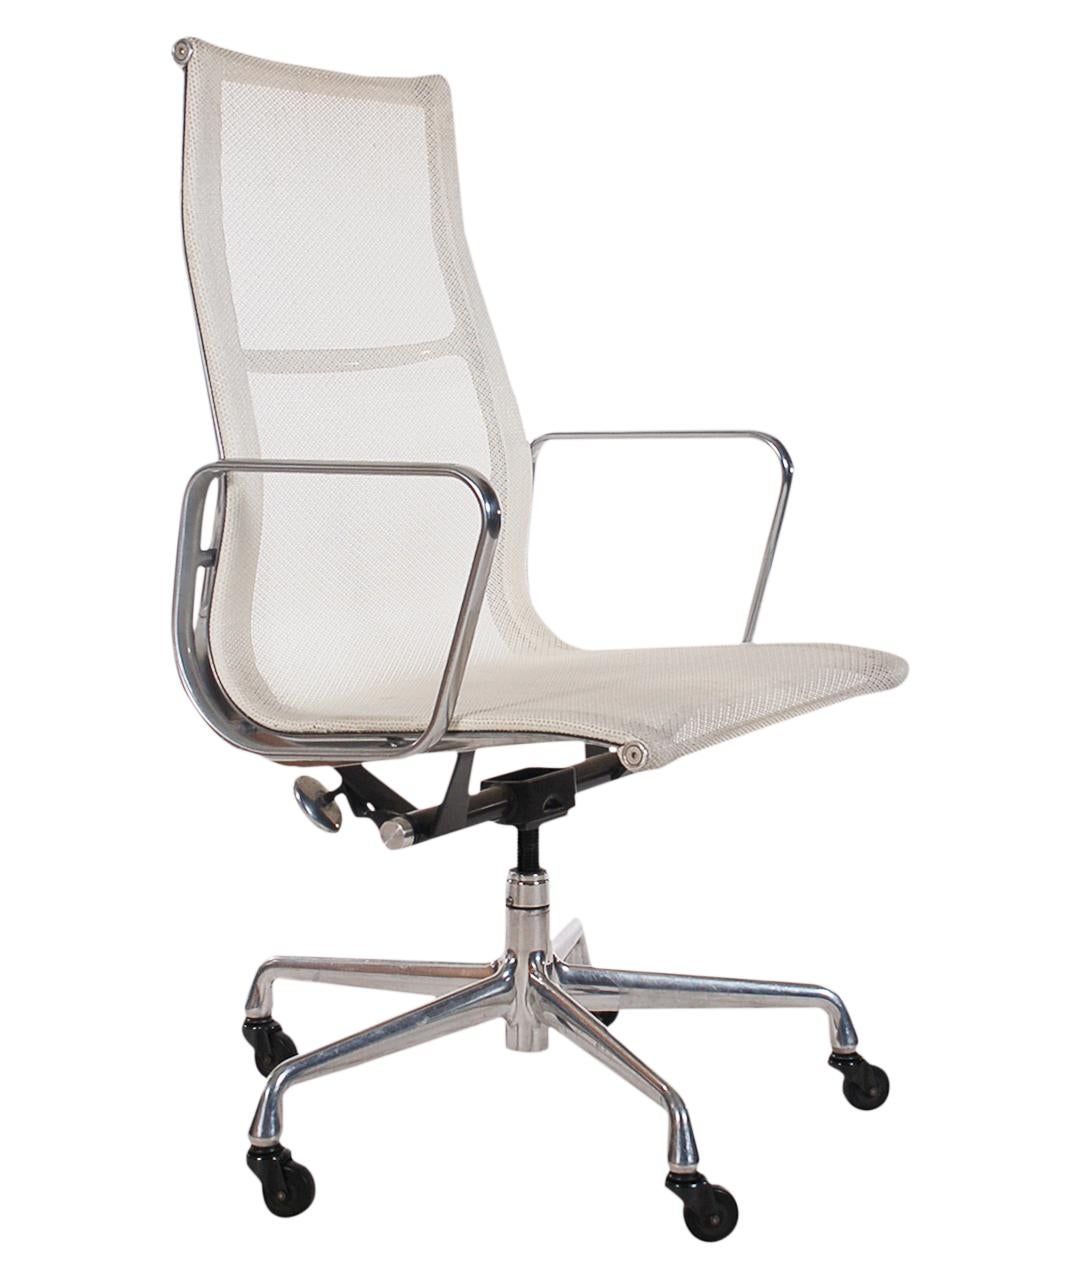 A matching pair of modern conference chairs or office chairs by Charles Eames and produced by Herman Miller. These chairs features an adjustable aluminum frame, casters for easy tasking, and a white mesh sling seating area. Extremely comfortable.